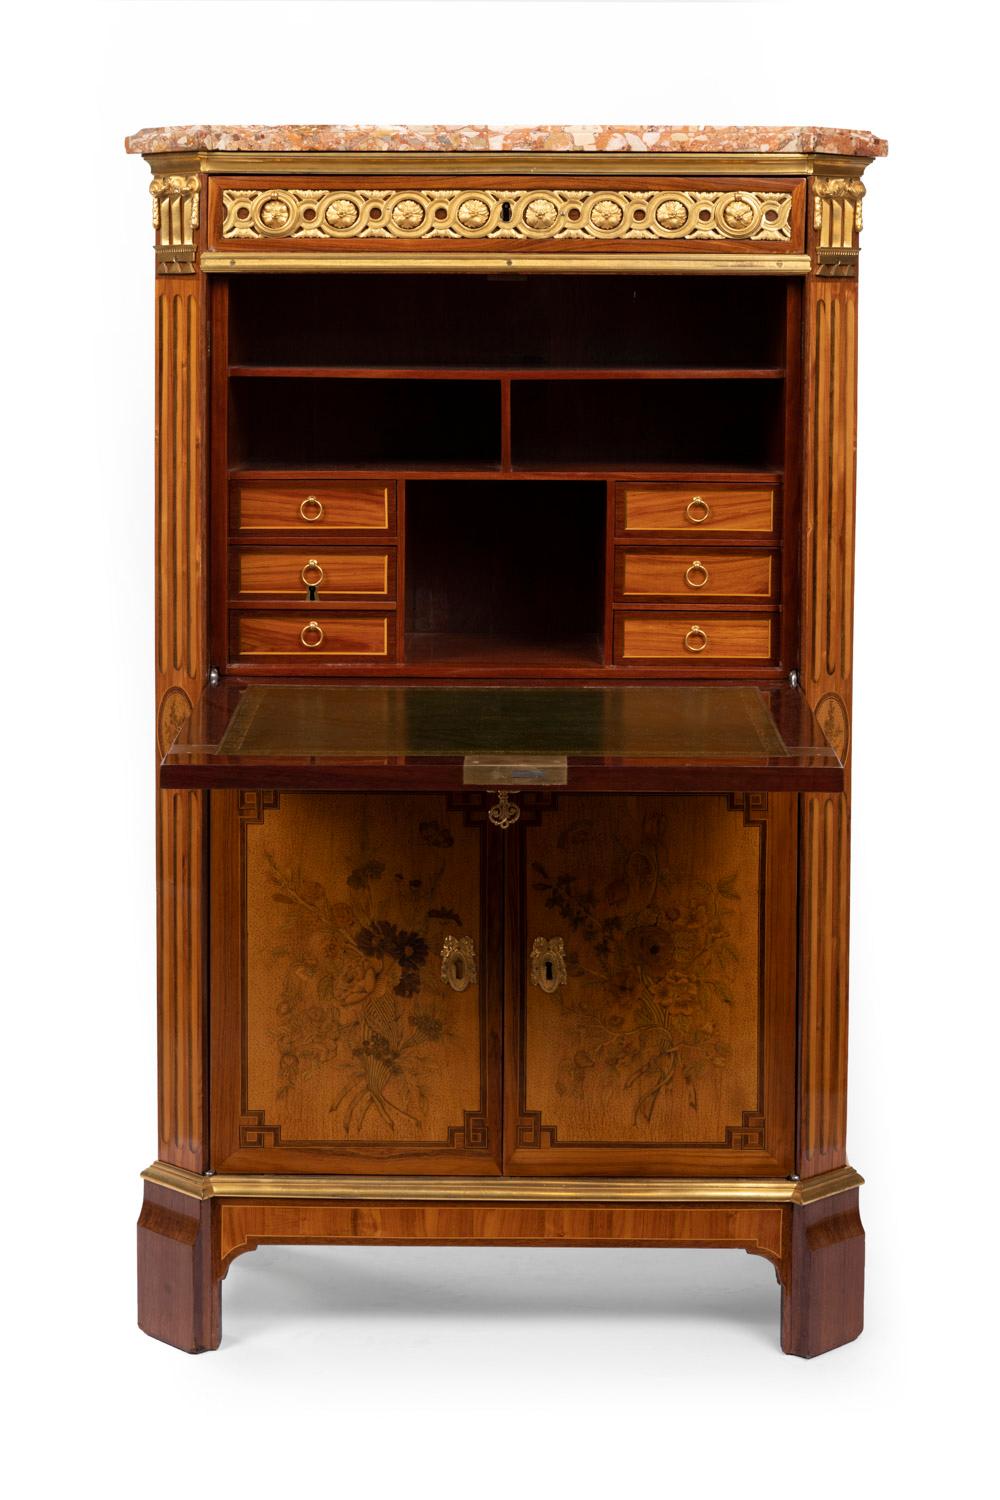 Desk in Flower Marquetry, Louis XVI Period, Stamped C. Topino, 18th Century For Sale 2